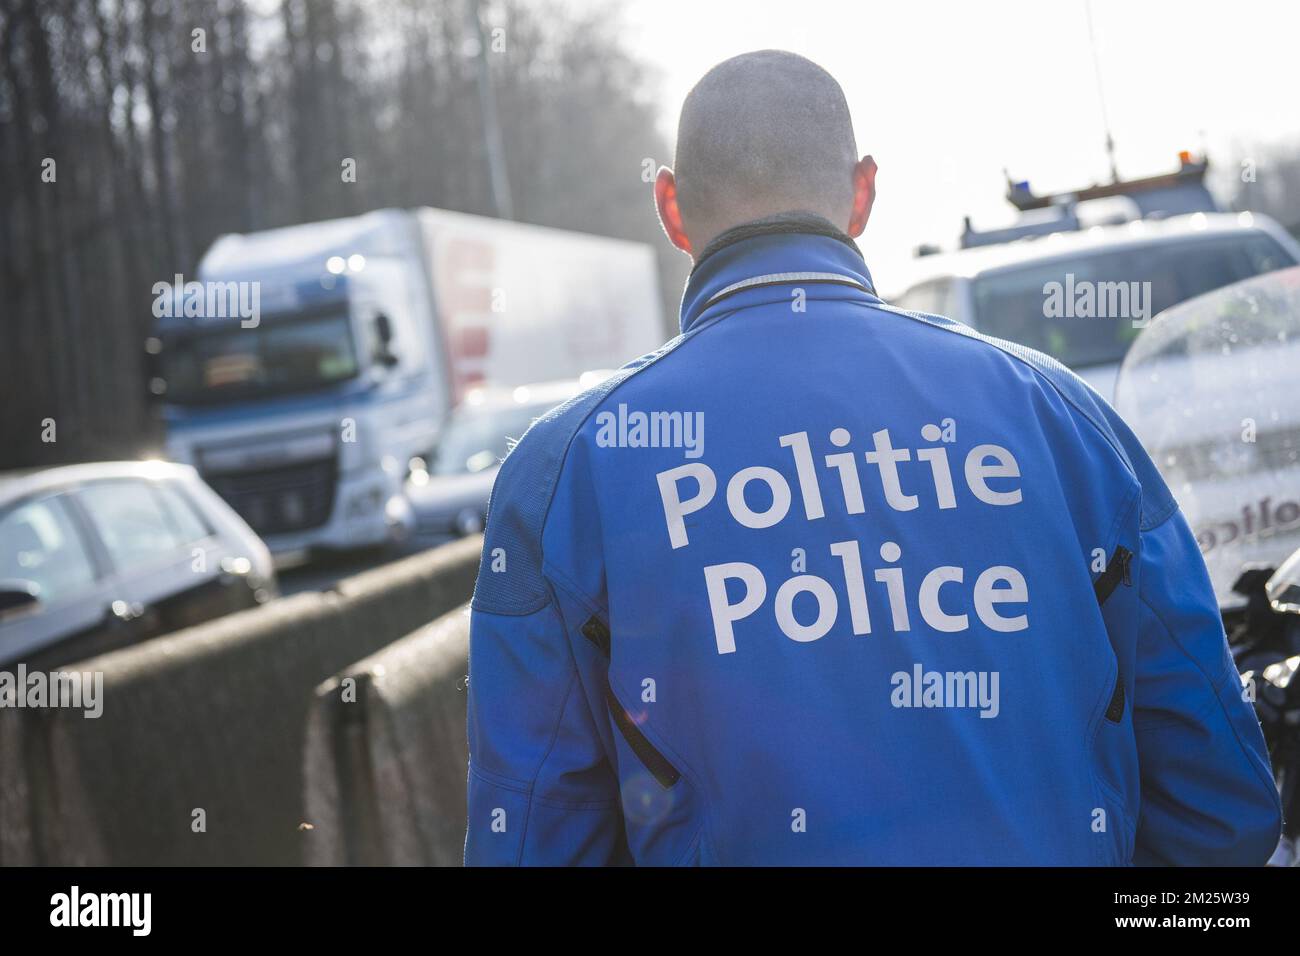 Illustration picture shows police during a control on fraud on the kilometer tax by Viapass, the government organization that monitors and controls the kilometer tax, Tuesday 14 March 2017, at Carrefour Leonard - Leonardkruispunt in Brussels. On 01 April 216, the Flemish, Walloon and Brussels Capital regions introduced a kilometer tax for trucks weighting more than 3.5 tons. Belgian and foreign trucks must have an OBU, On Board Unit, when driving on public roads in Belgium. BELGA PHOTO LAURIE DIEFFEMBACQ  Stock Photo